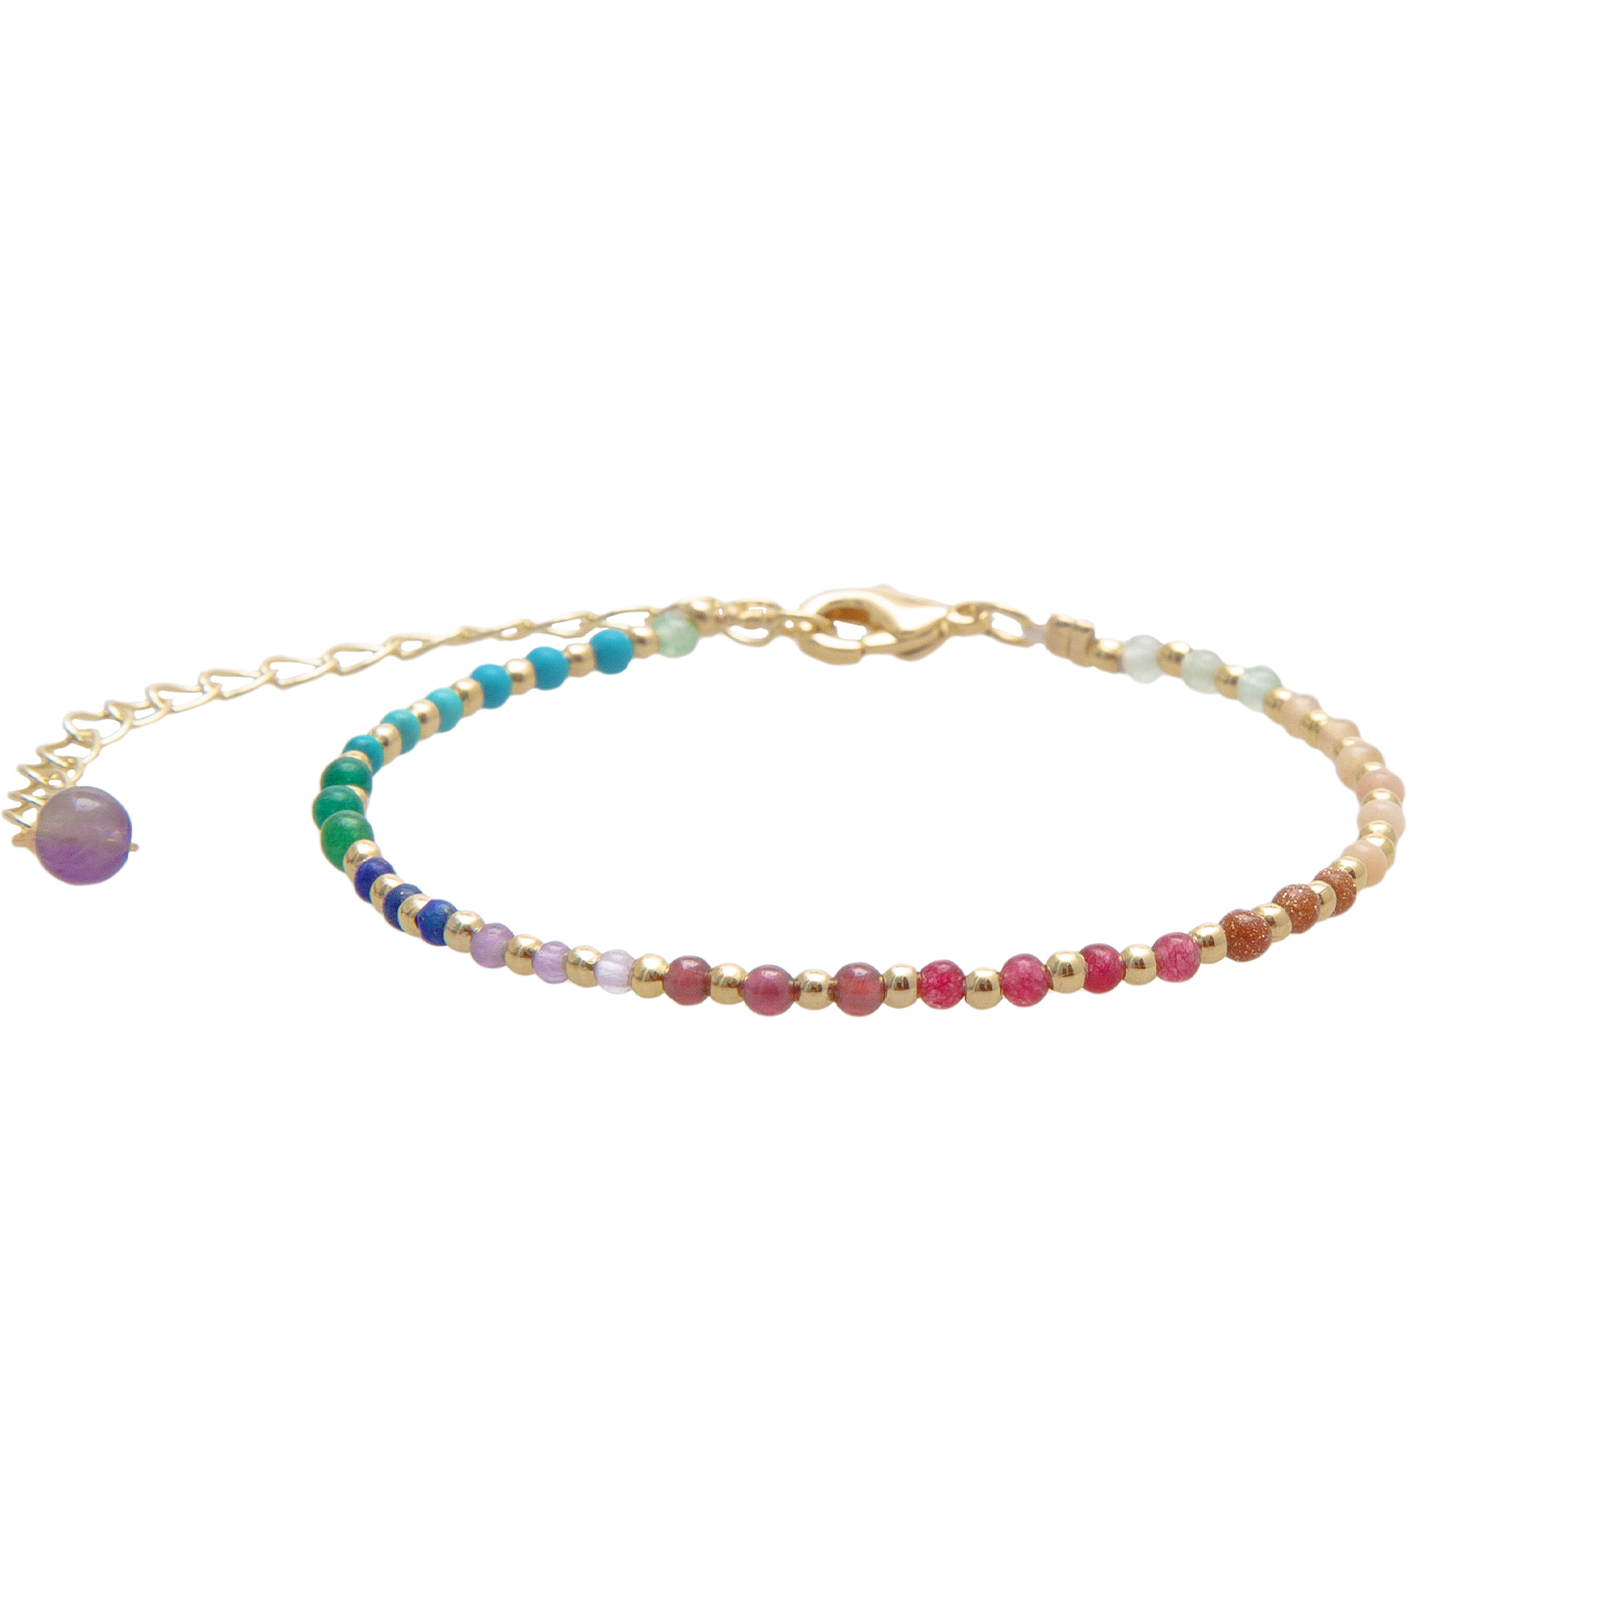 2mm multicolor stone and gold bead healing bracelet with gold chain